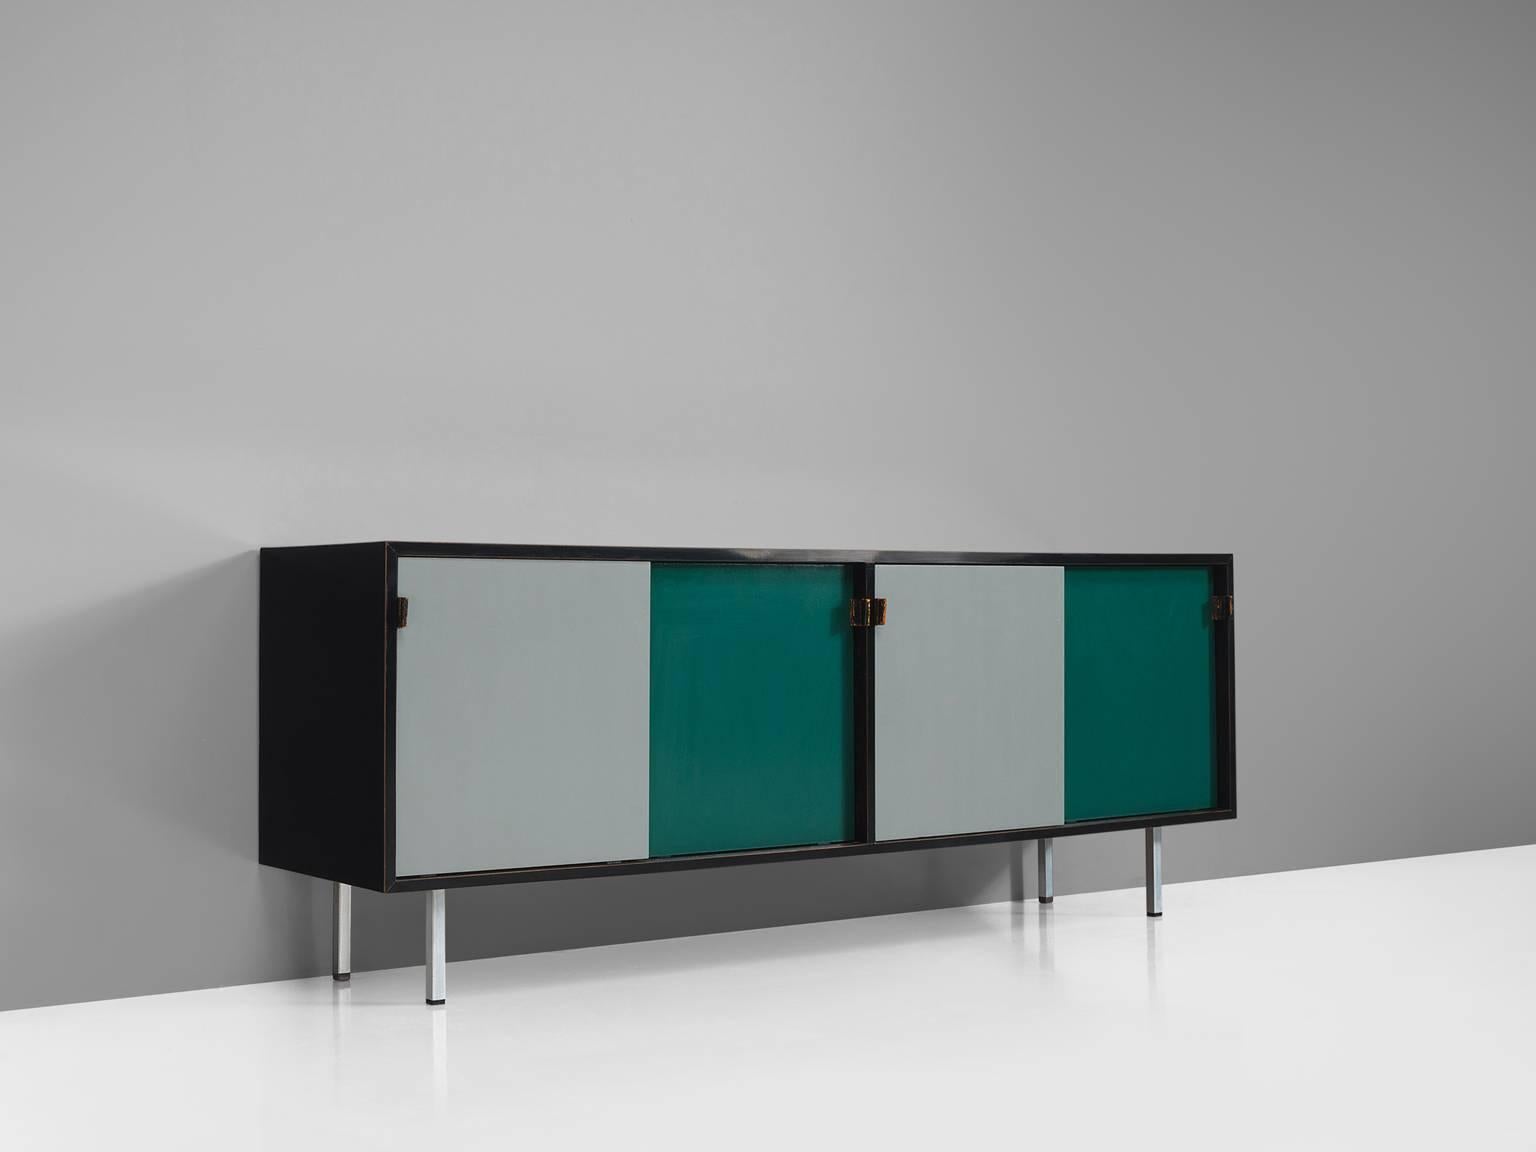 Florence Knoll for Knoll, sideboard, grey and green wood, metal feet, leather straps, France, 1960s.

This sideboard is designed and made by making use of color blocks. The sideboard is executed in green and grey sliding doors that are framed by a